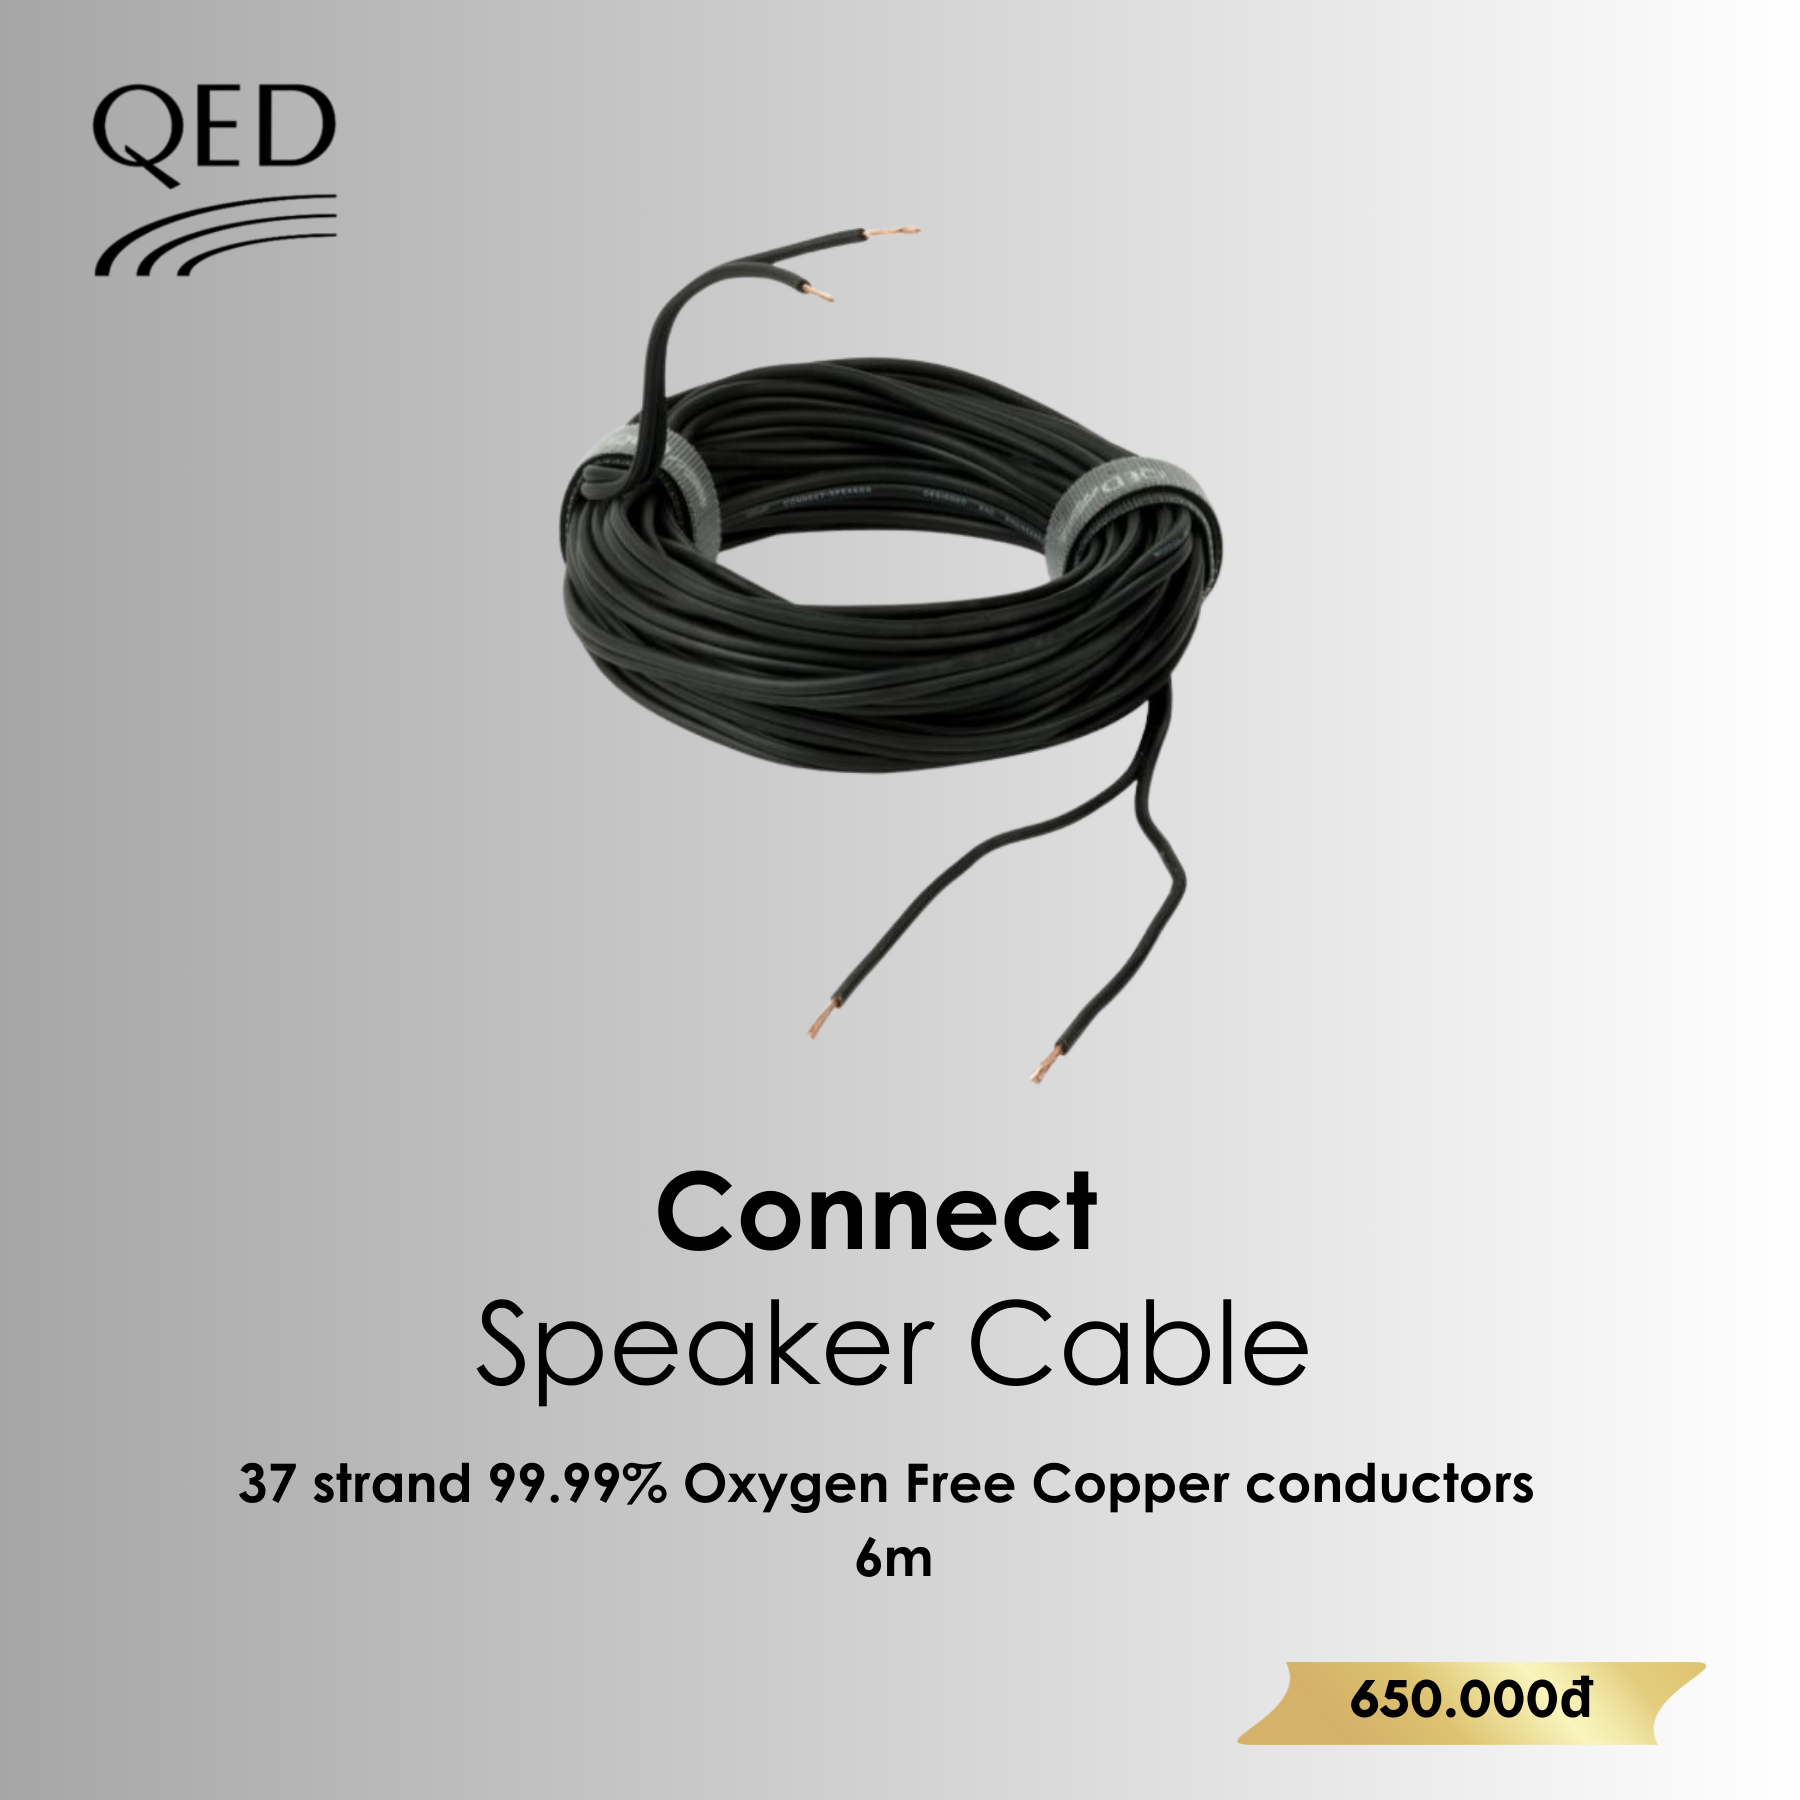 Connect Speaker Cable